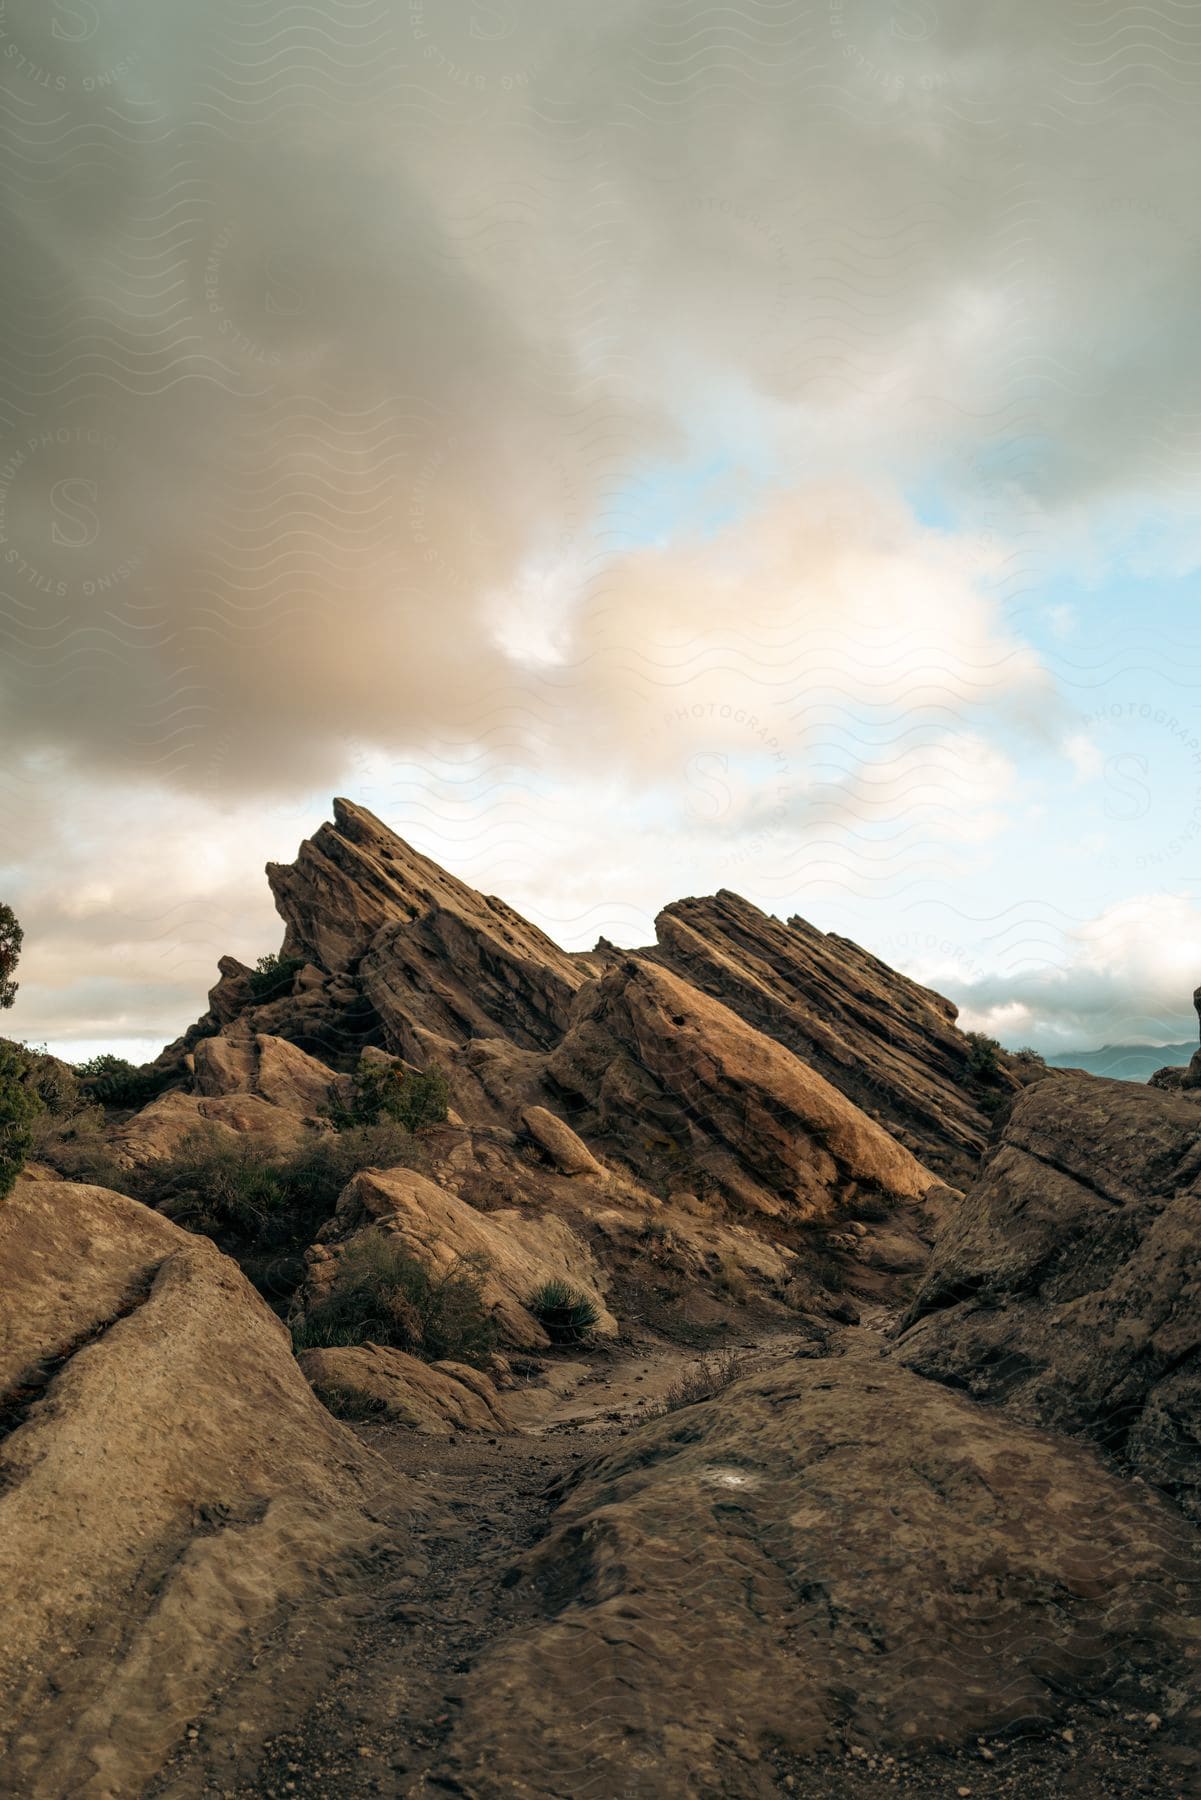 Rock formations on a mountain in a cloudy sky